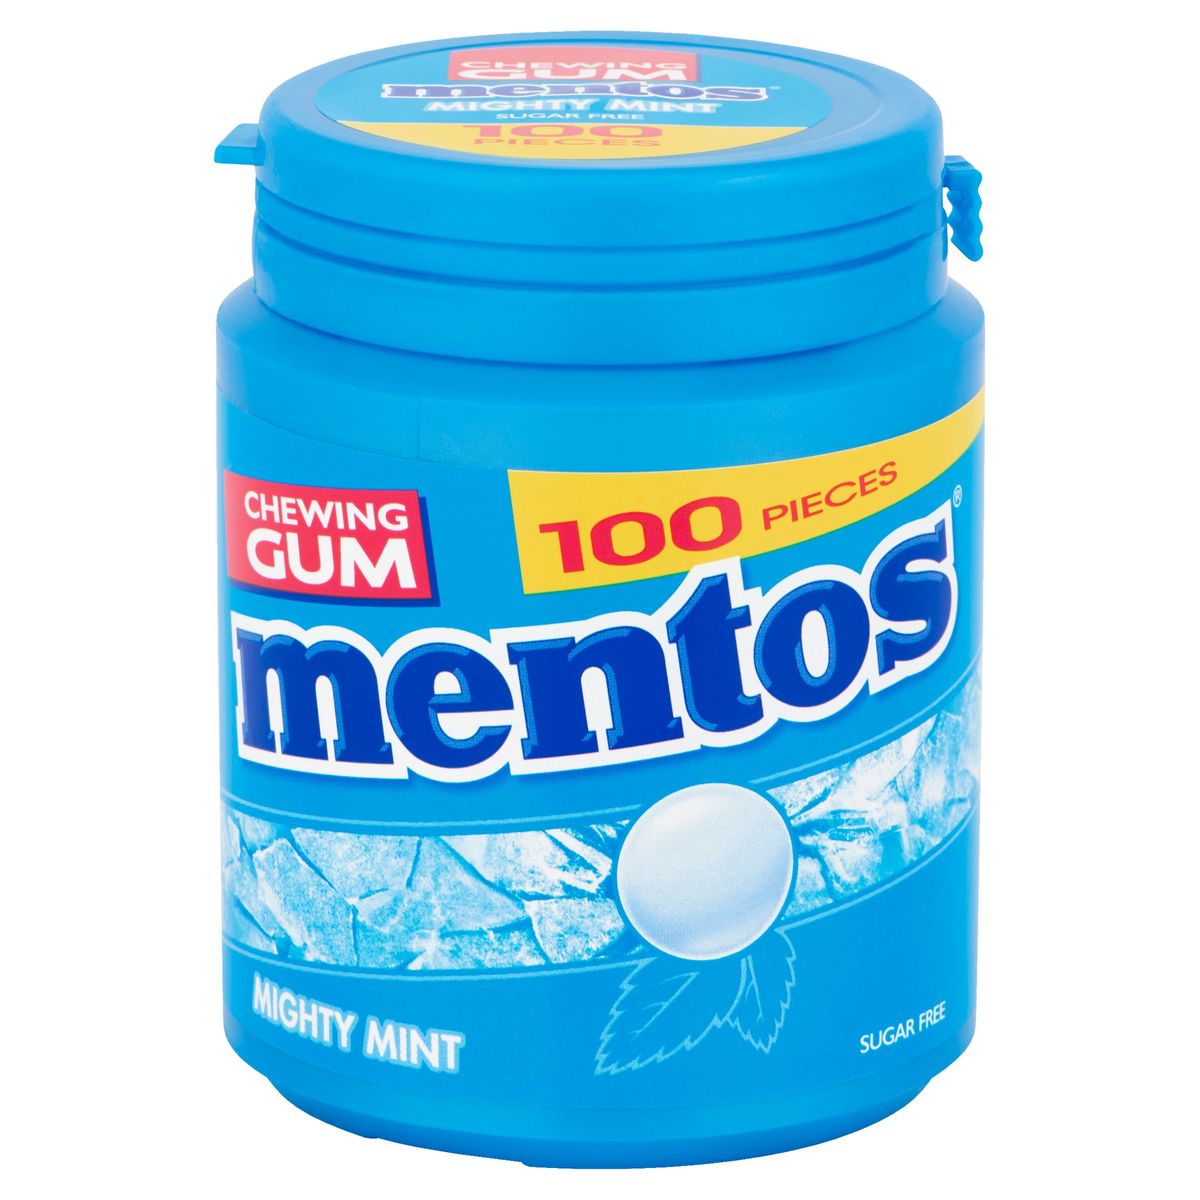 Mentos Chewing Gum Mighty Mint Sugar Free 100 Pièces 150 g